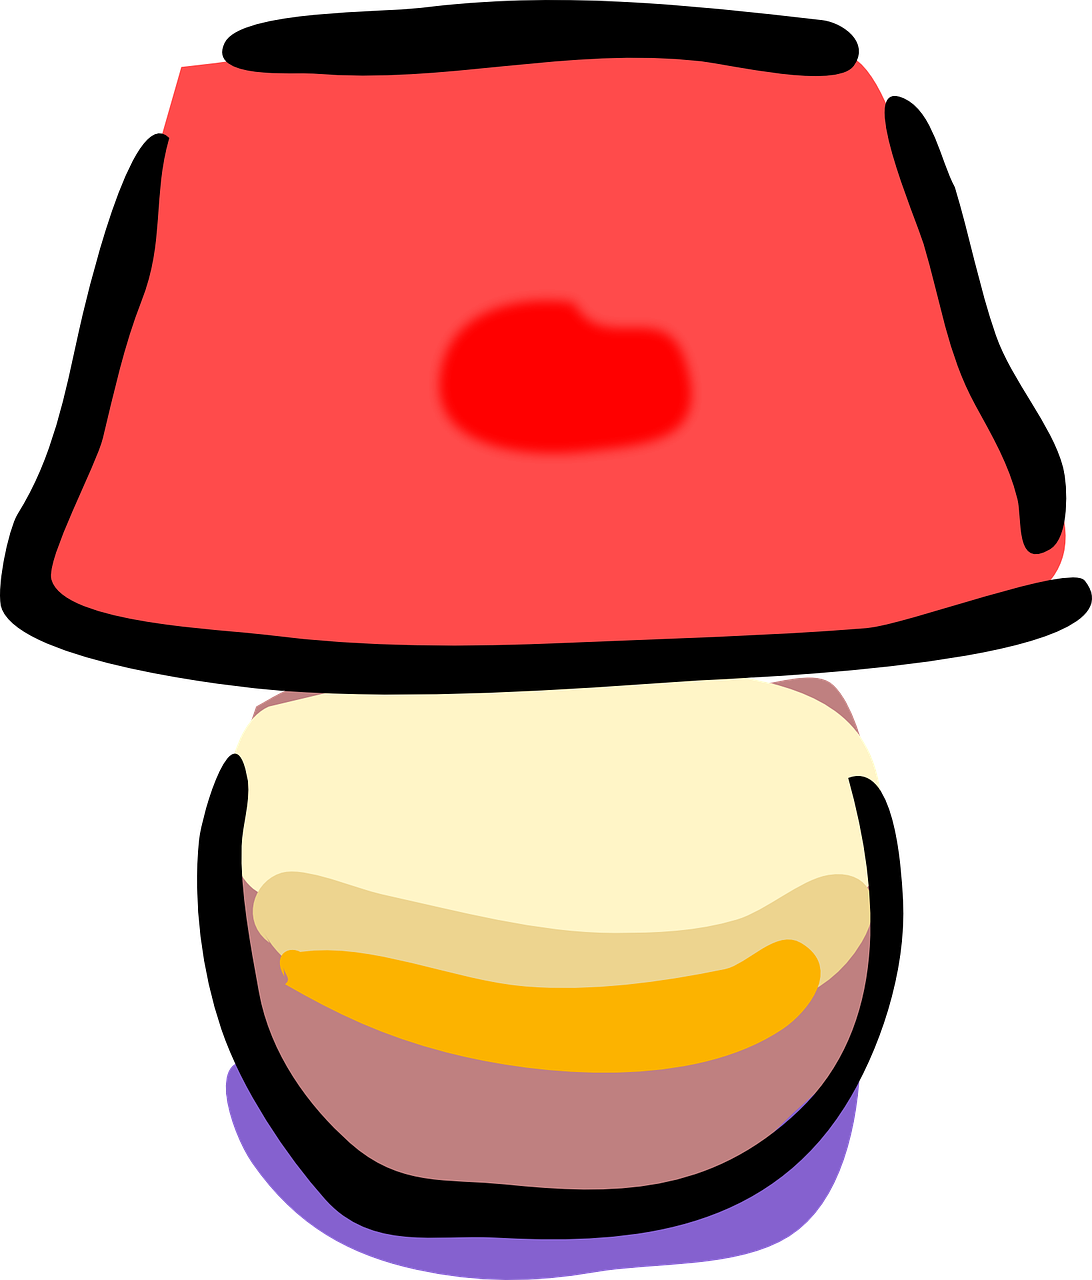 a red hat sitting on top of a table, inspired by Mario Comensoli, pop art, mushroom kingdom, mini. abstract illustration, lamp, clip art